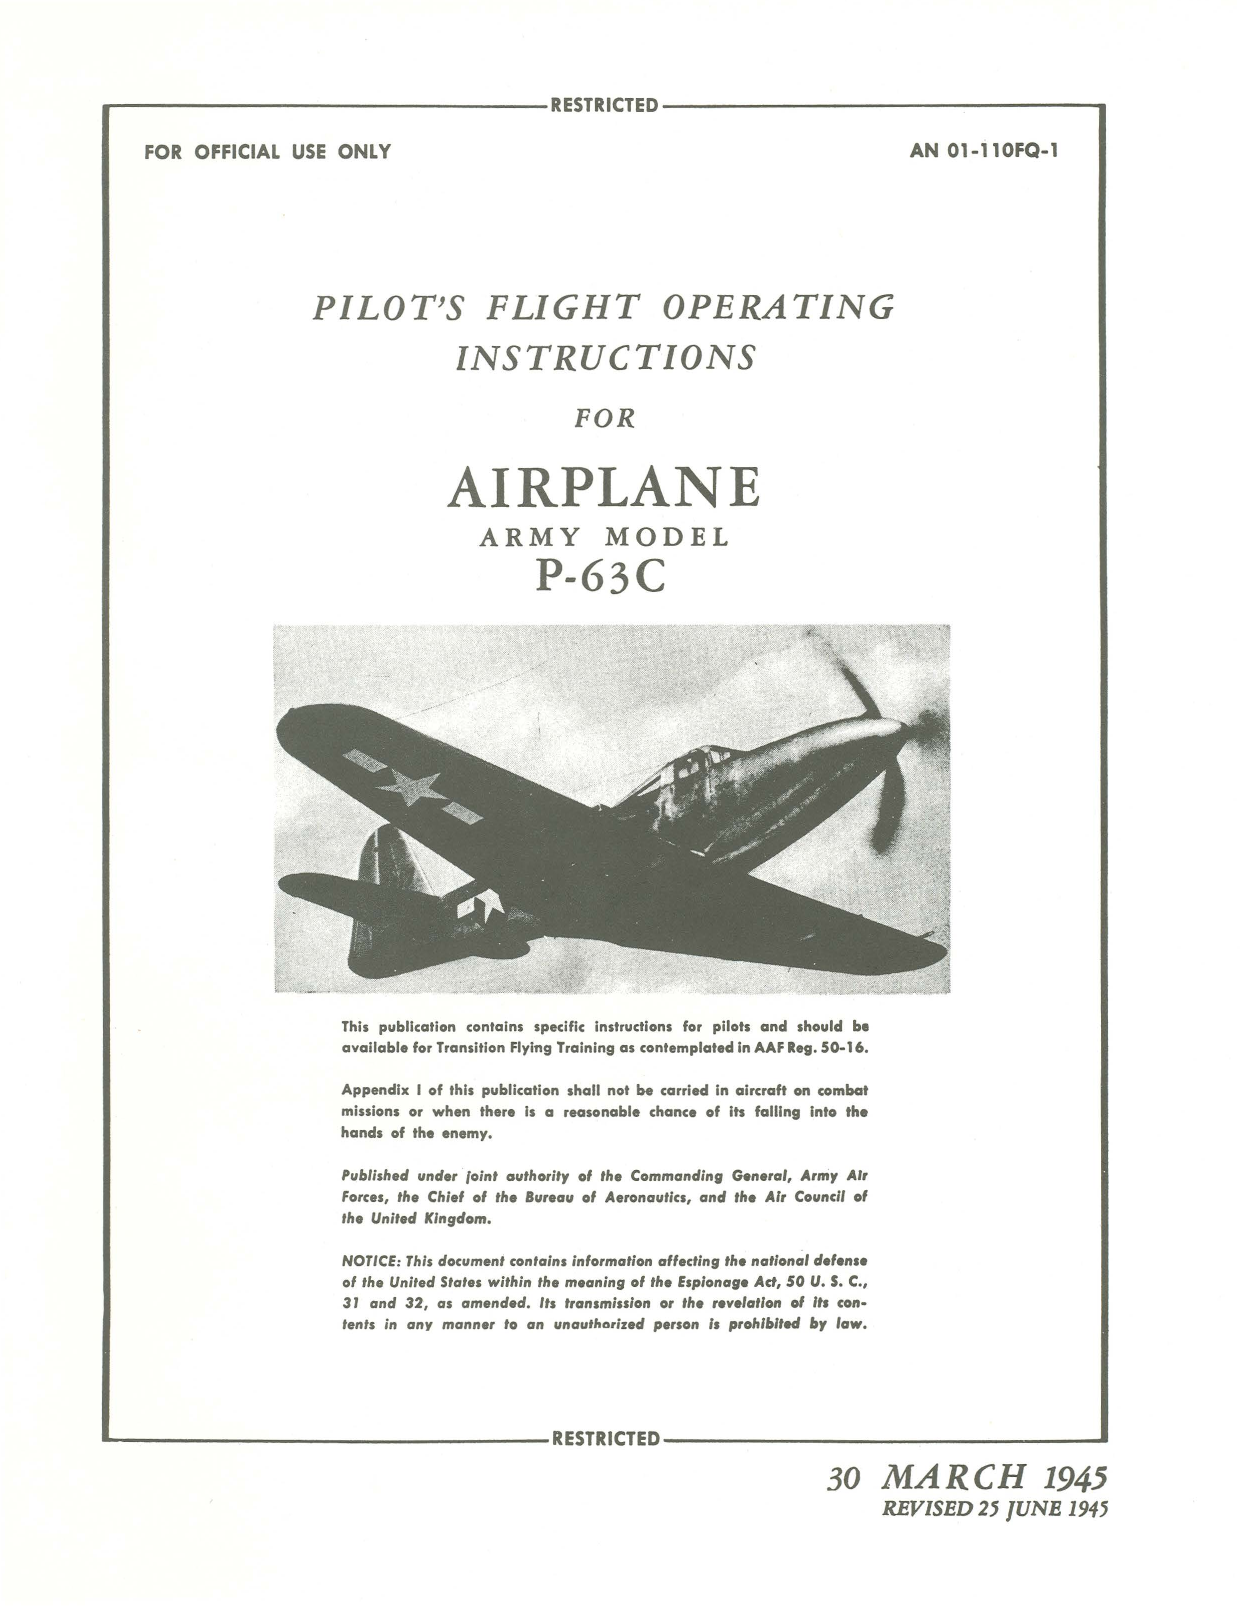 Sample page 1 from AirCorps Library document: Pilot's Flight Operating Instructions for P-63C